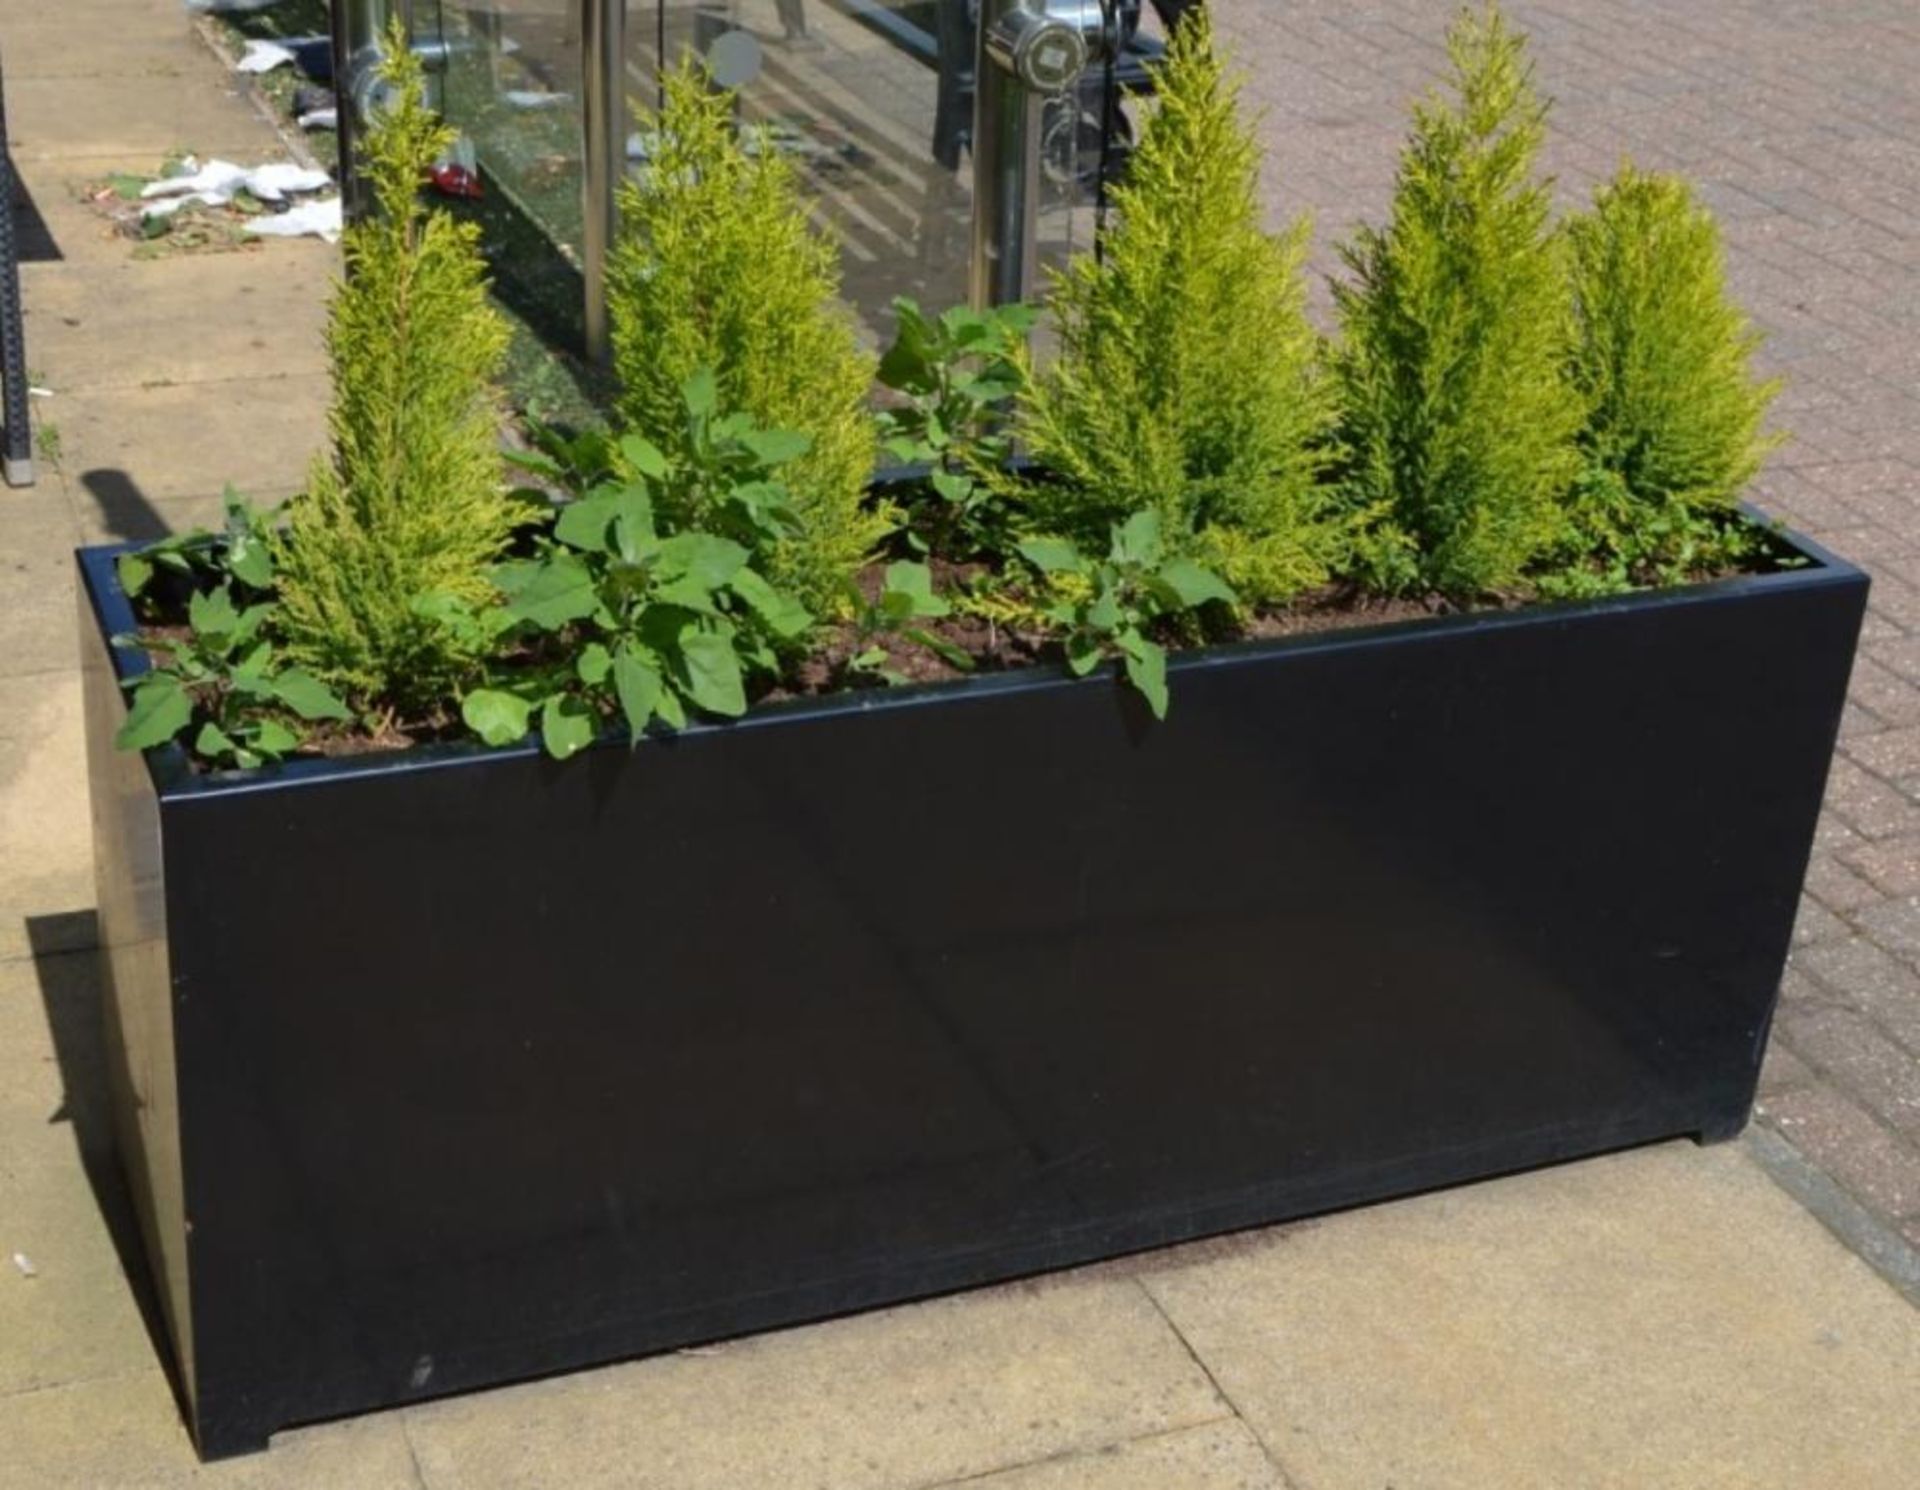 2 x Rectangular Outdoor Planters in Black With Small Conifer Trees - Pair of - Planter Size H55 x